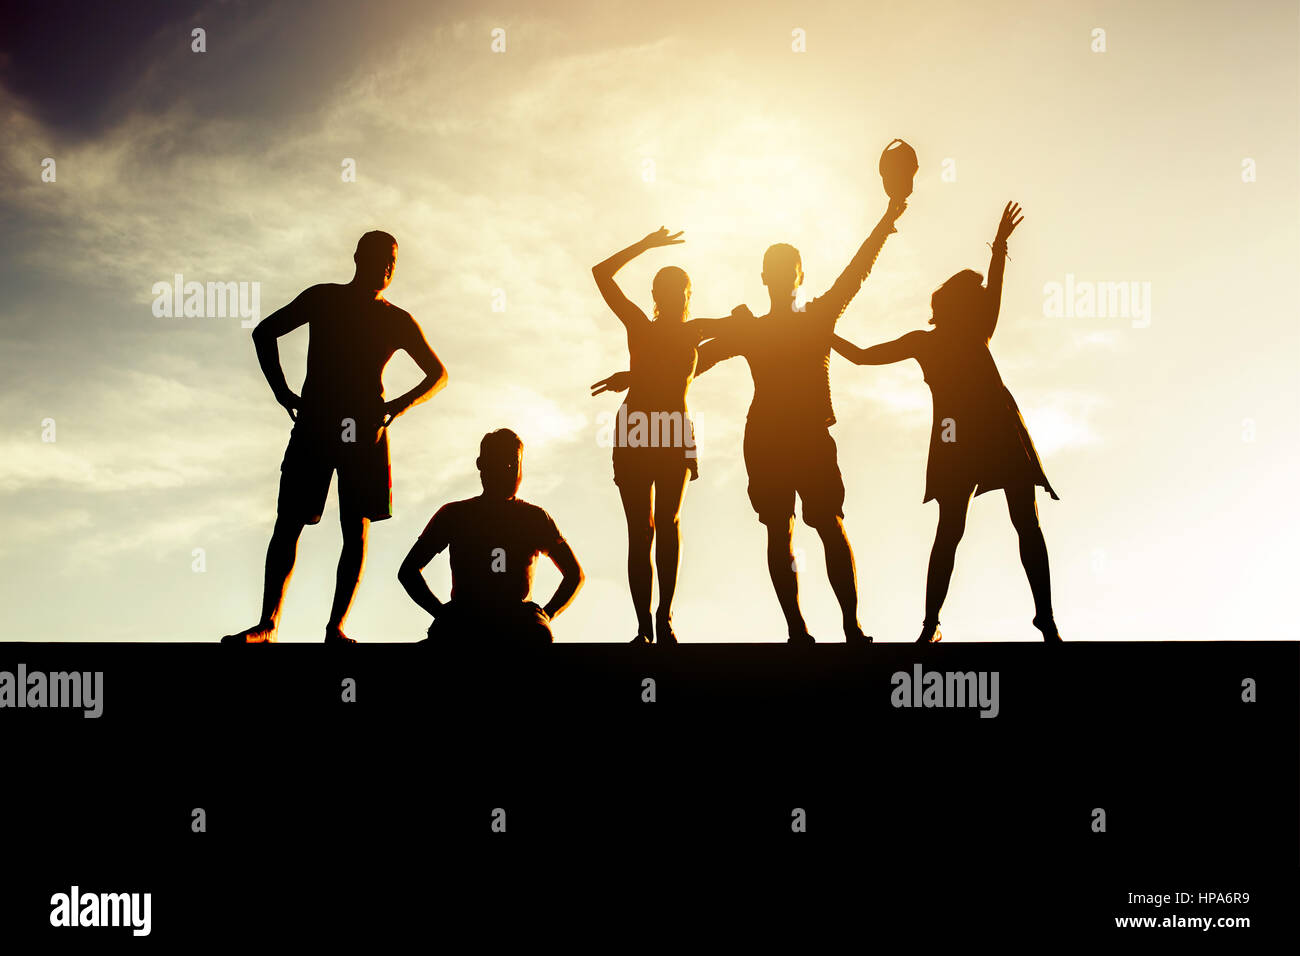 Friends concept group people silhouettes Stock Photo